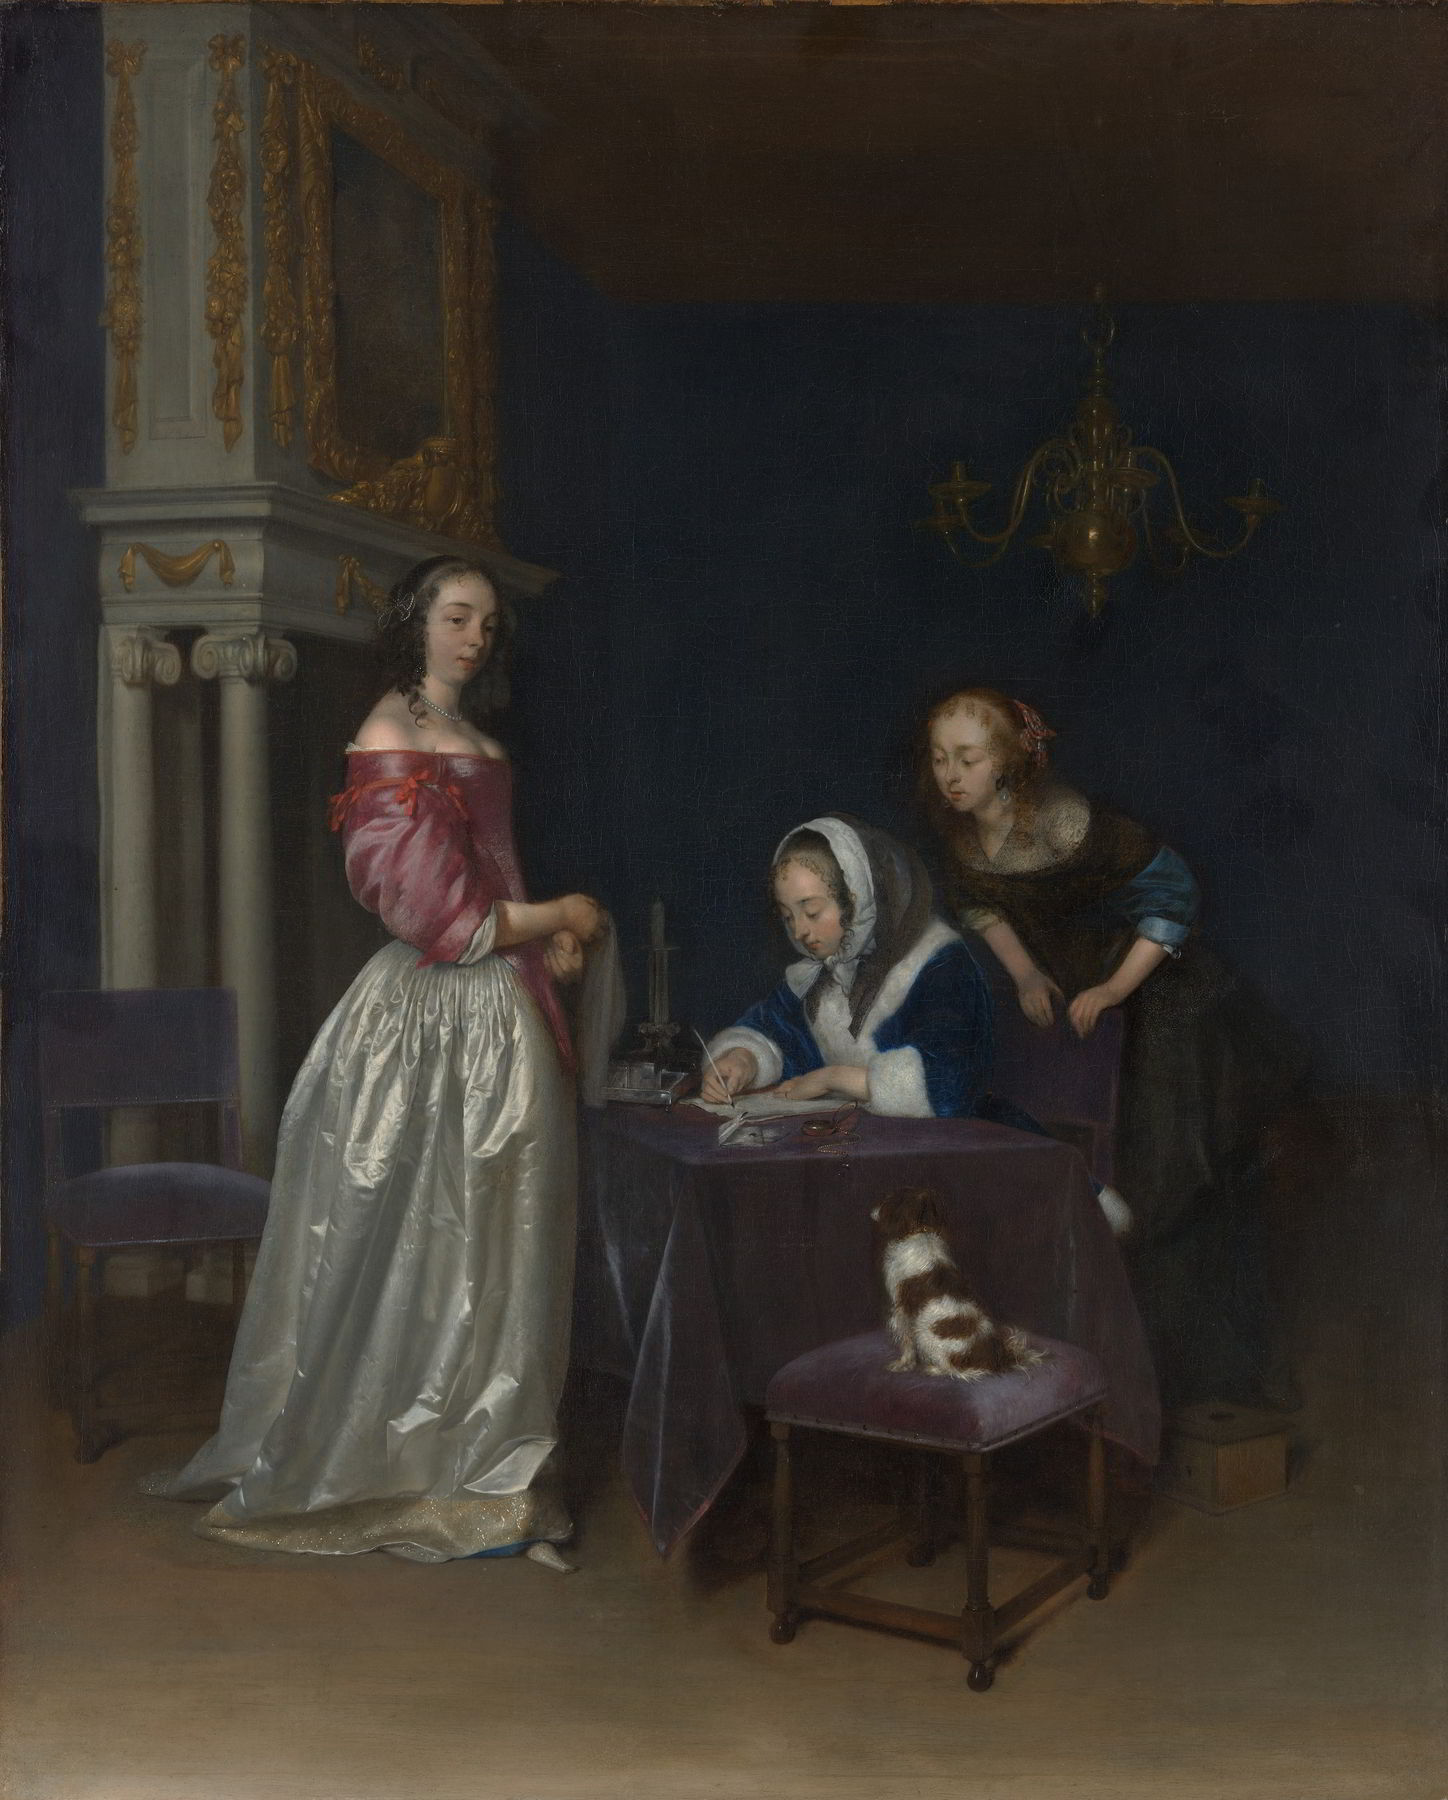 Curiosity by Gerard ter Borch